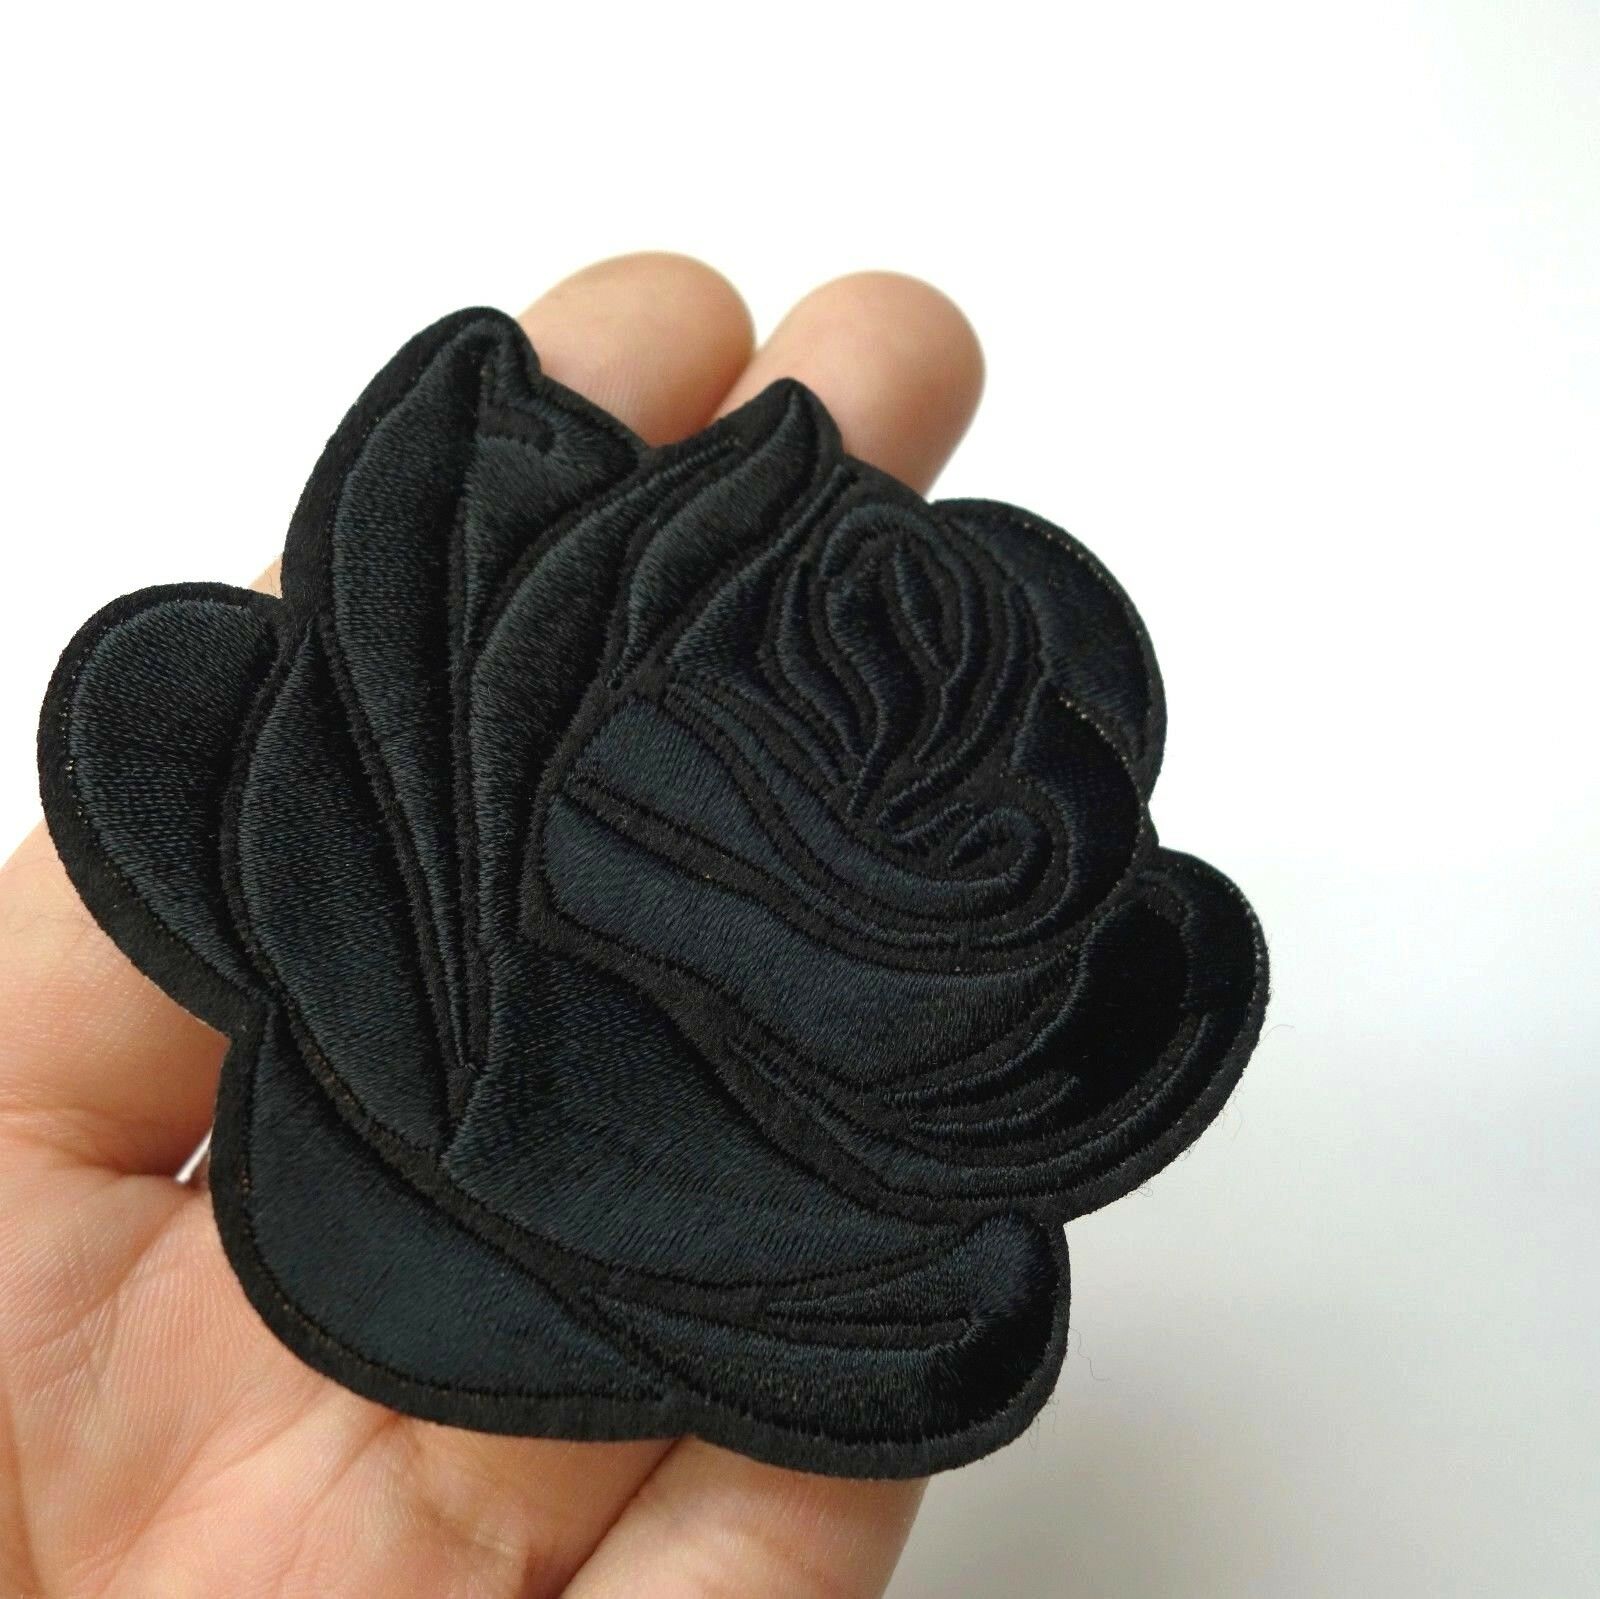 Black Rose Iron-on/sew-on Embroidered Patch, Applique Motif - Goth Punk Alt Emo